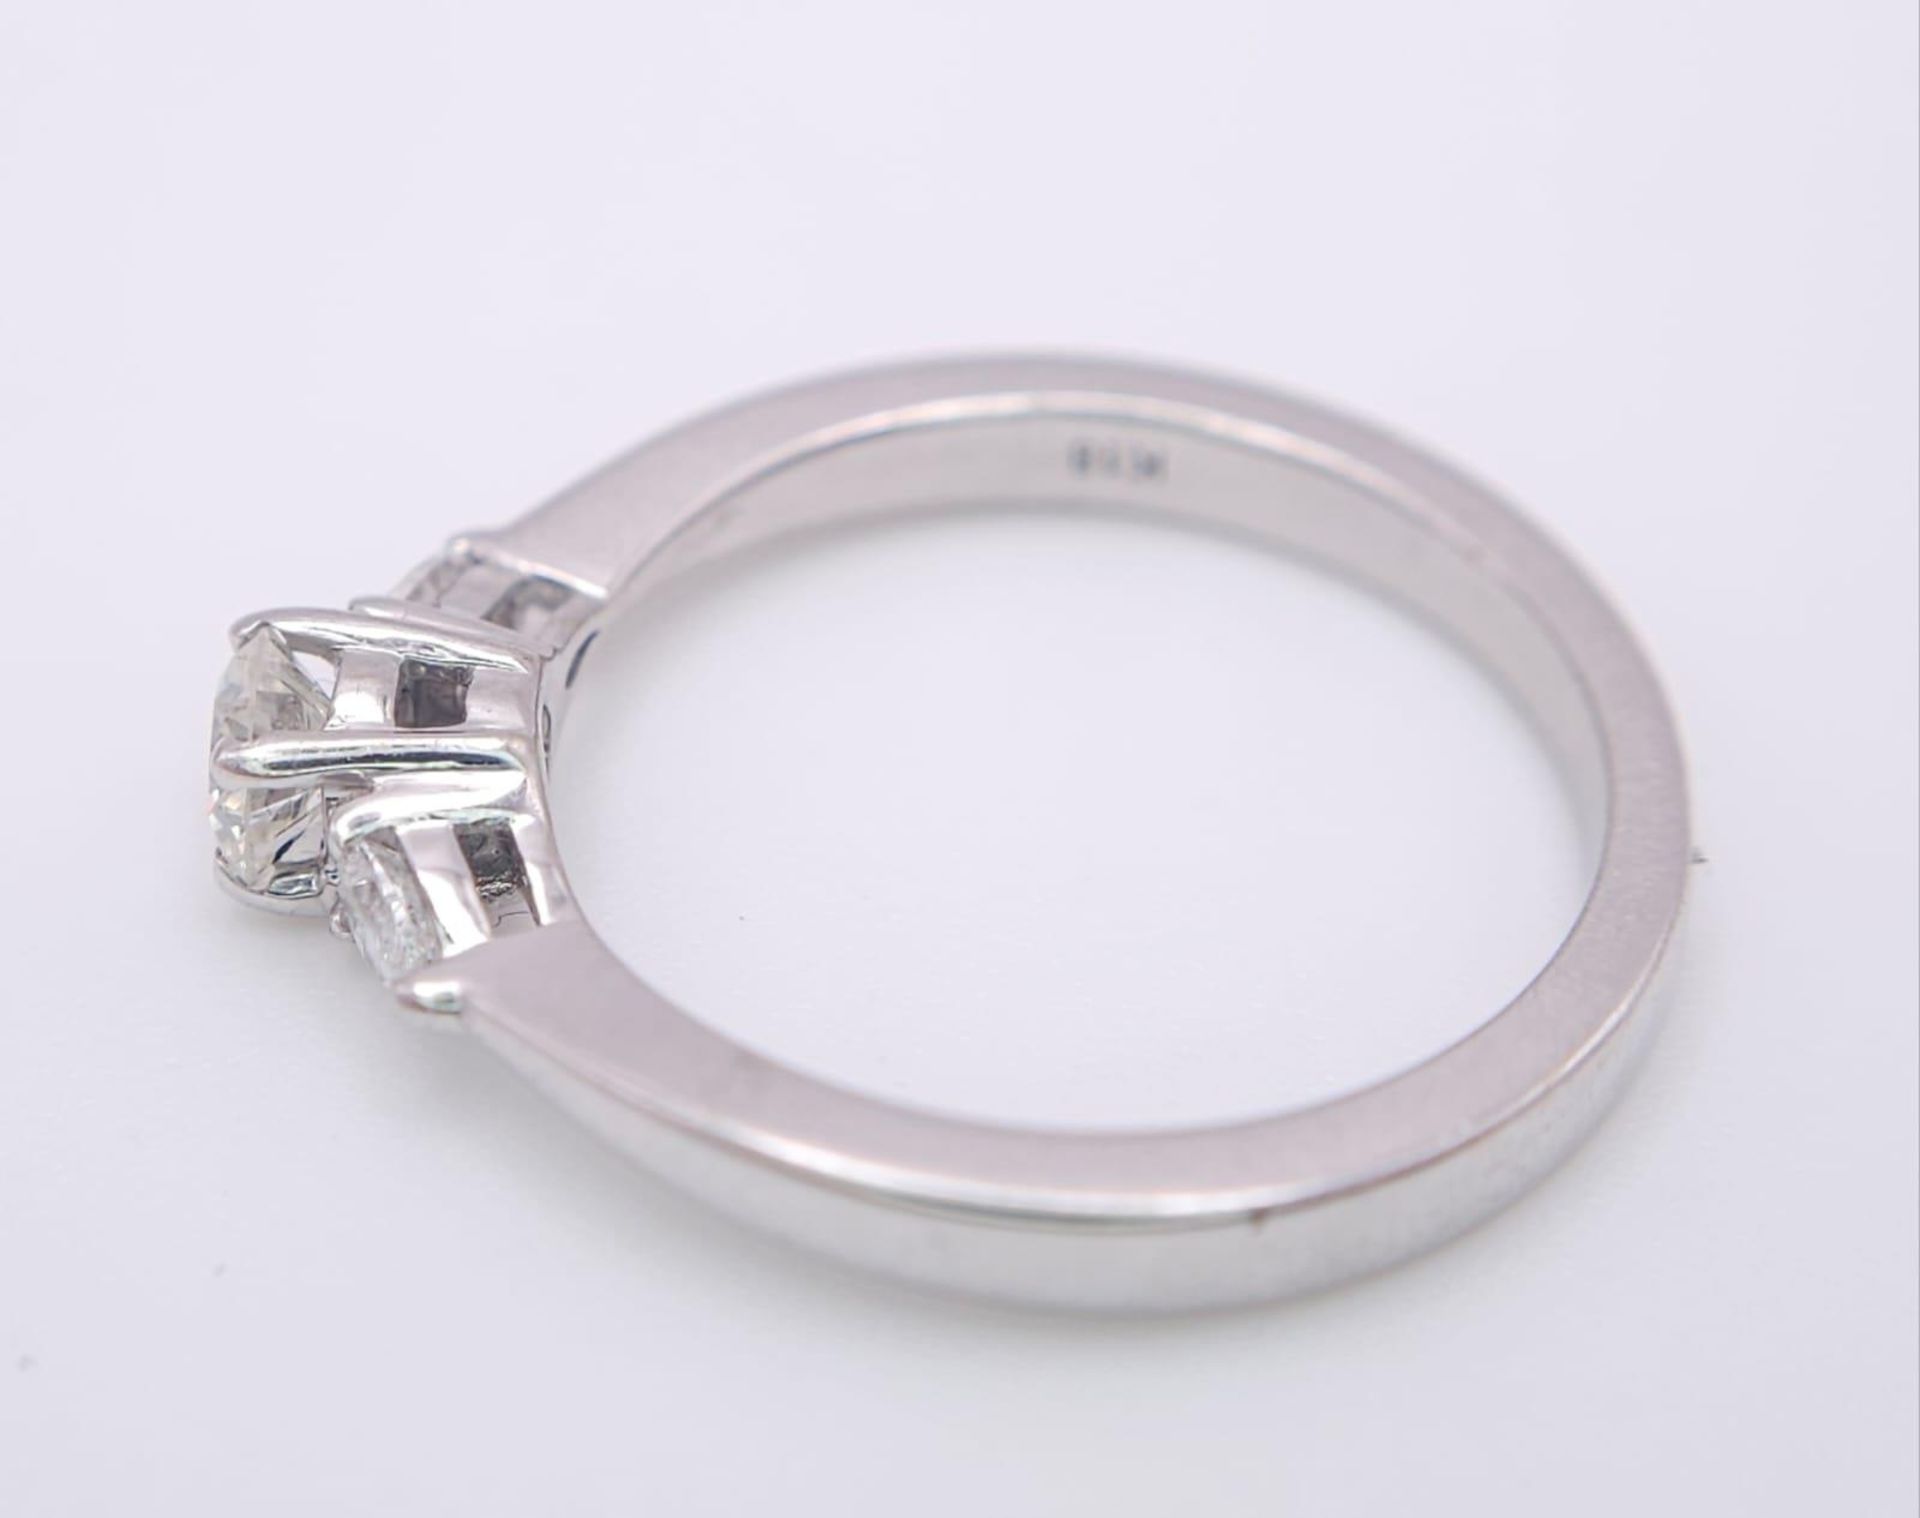 AN 18K WHITE GOLD DIAMOND RING WITH PEAR SHAPED DIAMOND ACCENTS ON SHOULDERS. 0.40CTW OF PEAR SHAPED - Image 3 of 7